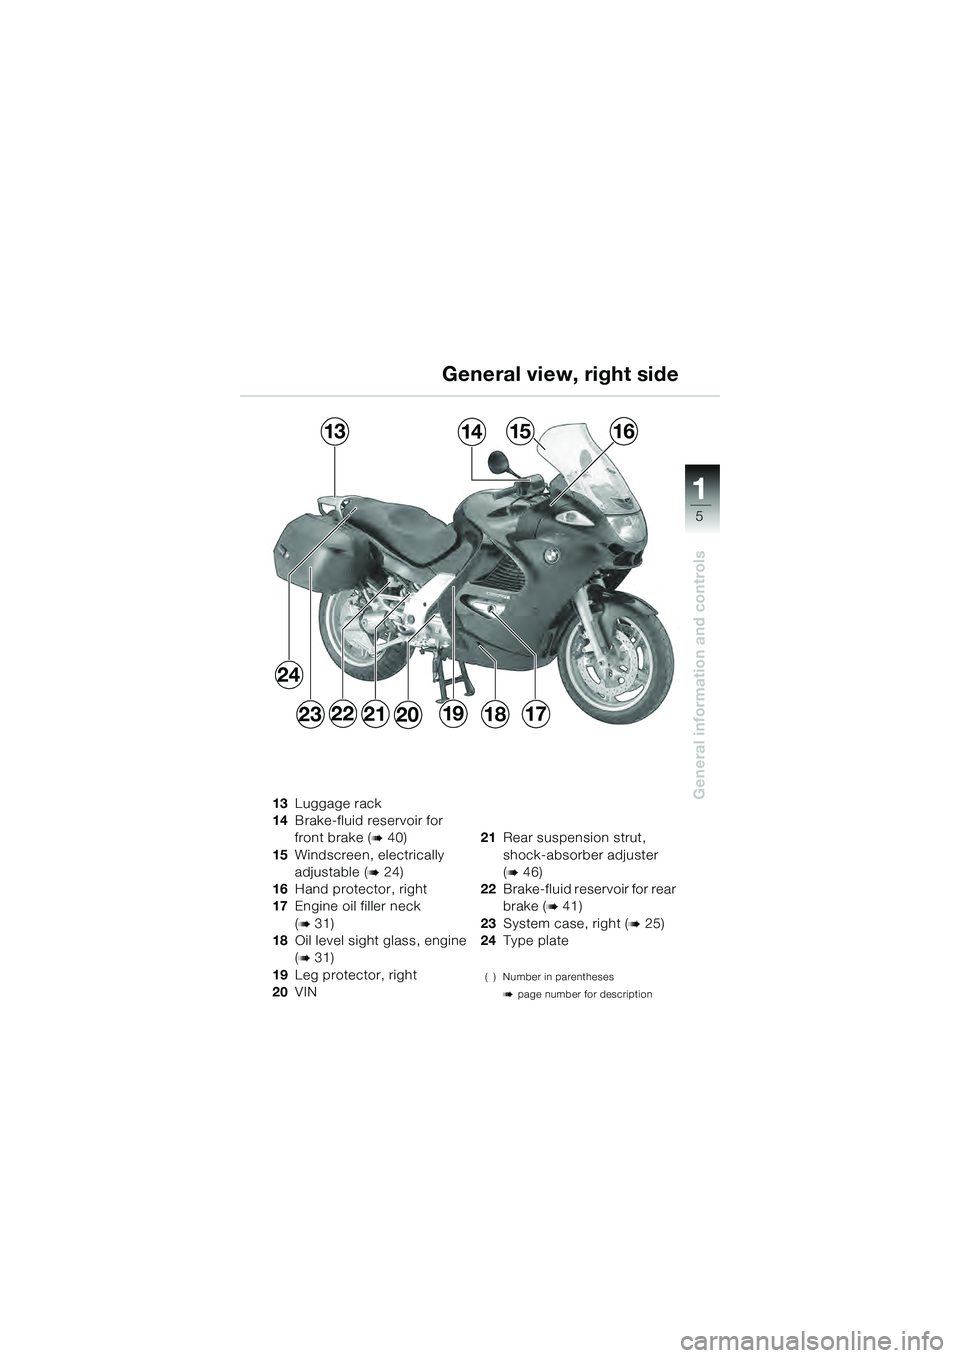 BMW MOTORRAD K 1200 GT 2004  Riders Manual (in English) 5
General information and controls
1
General view, right side
13Luggage rack
14 Brake-fluid reservoir for 
front brake (
 40)
15 Windscreen, electrically 
adjustable (
 24)
16 Hand protector, right
